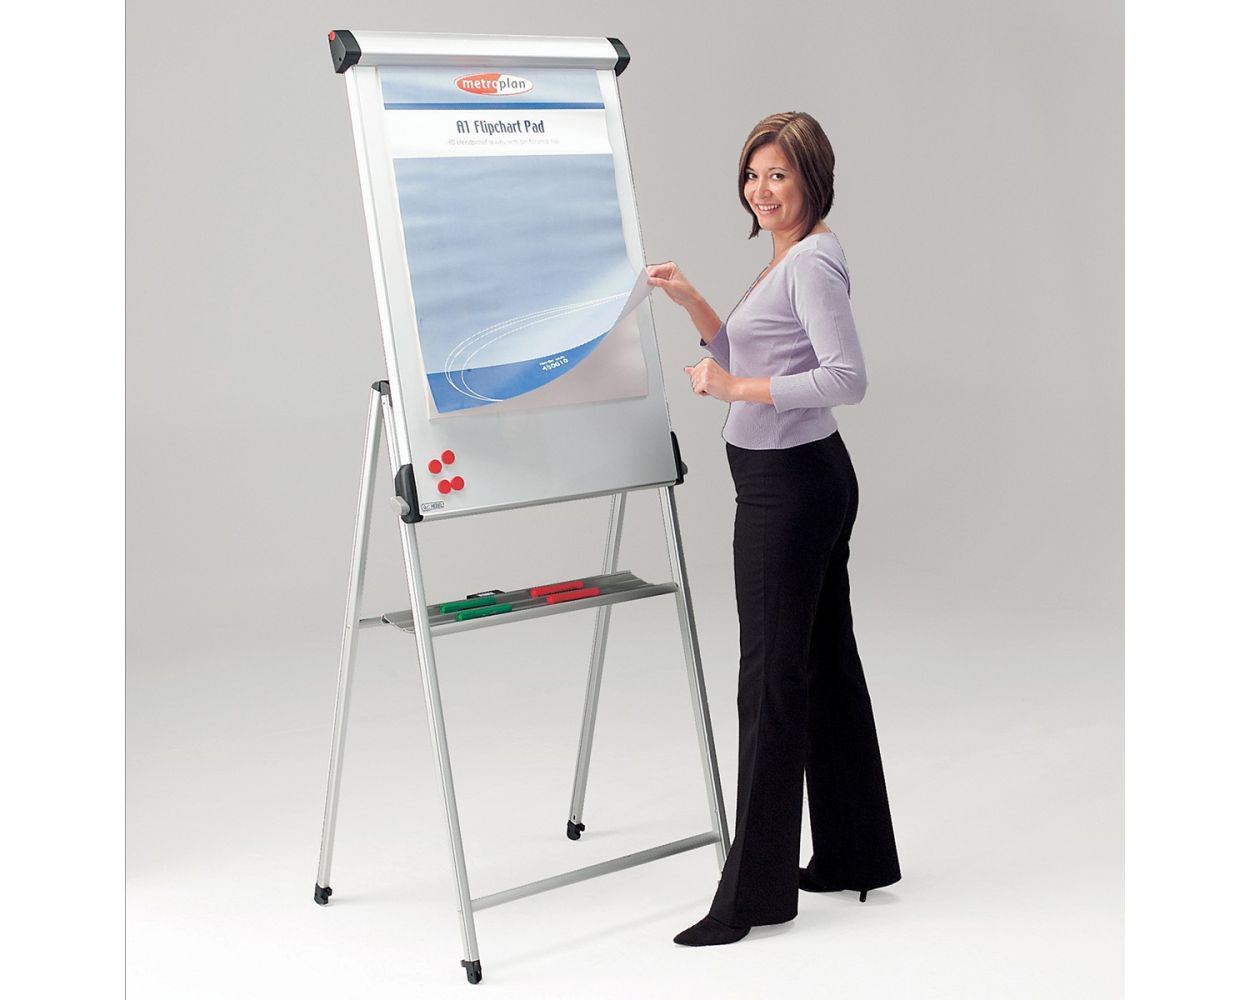 Conference Pro Professional Flipchart Easel. Great Prices White